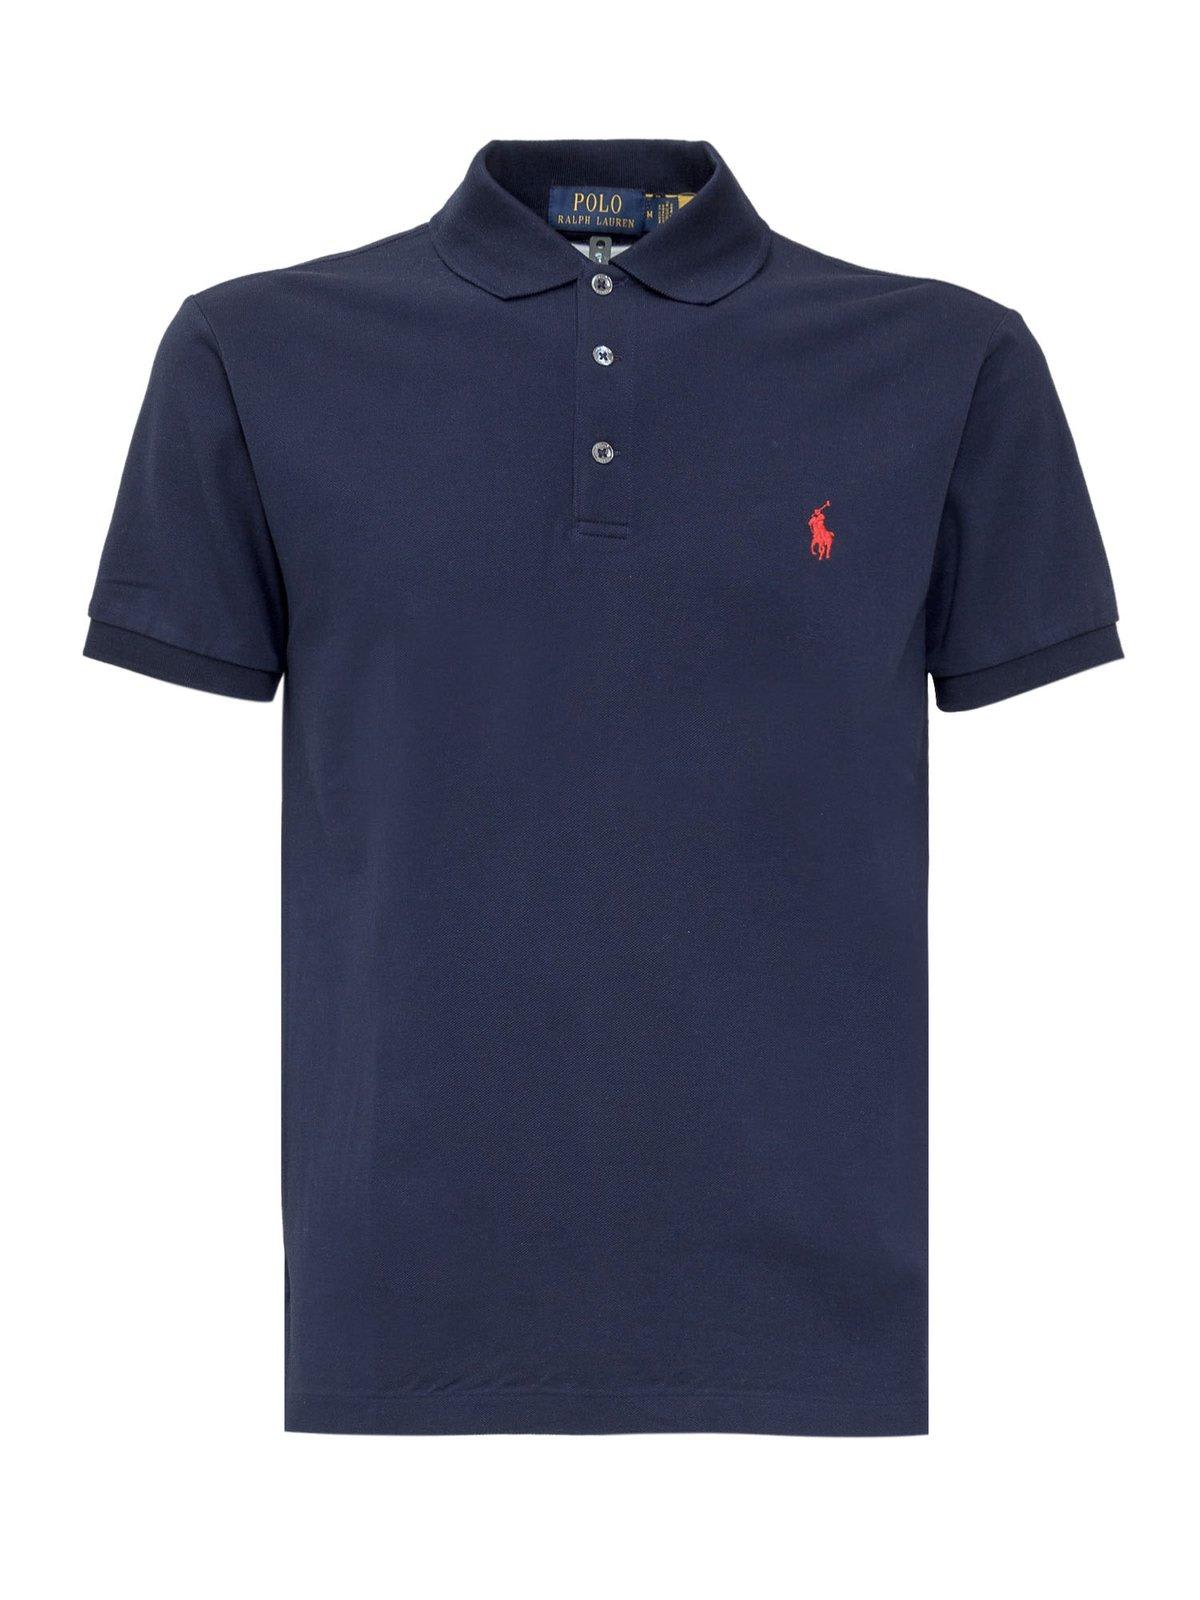 POLO RALPH LAUREN LOGO EMBROIDERED SLIM-FIT POLO SHIRT